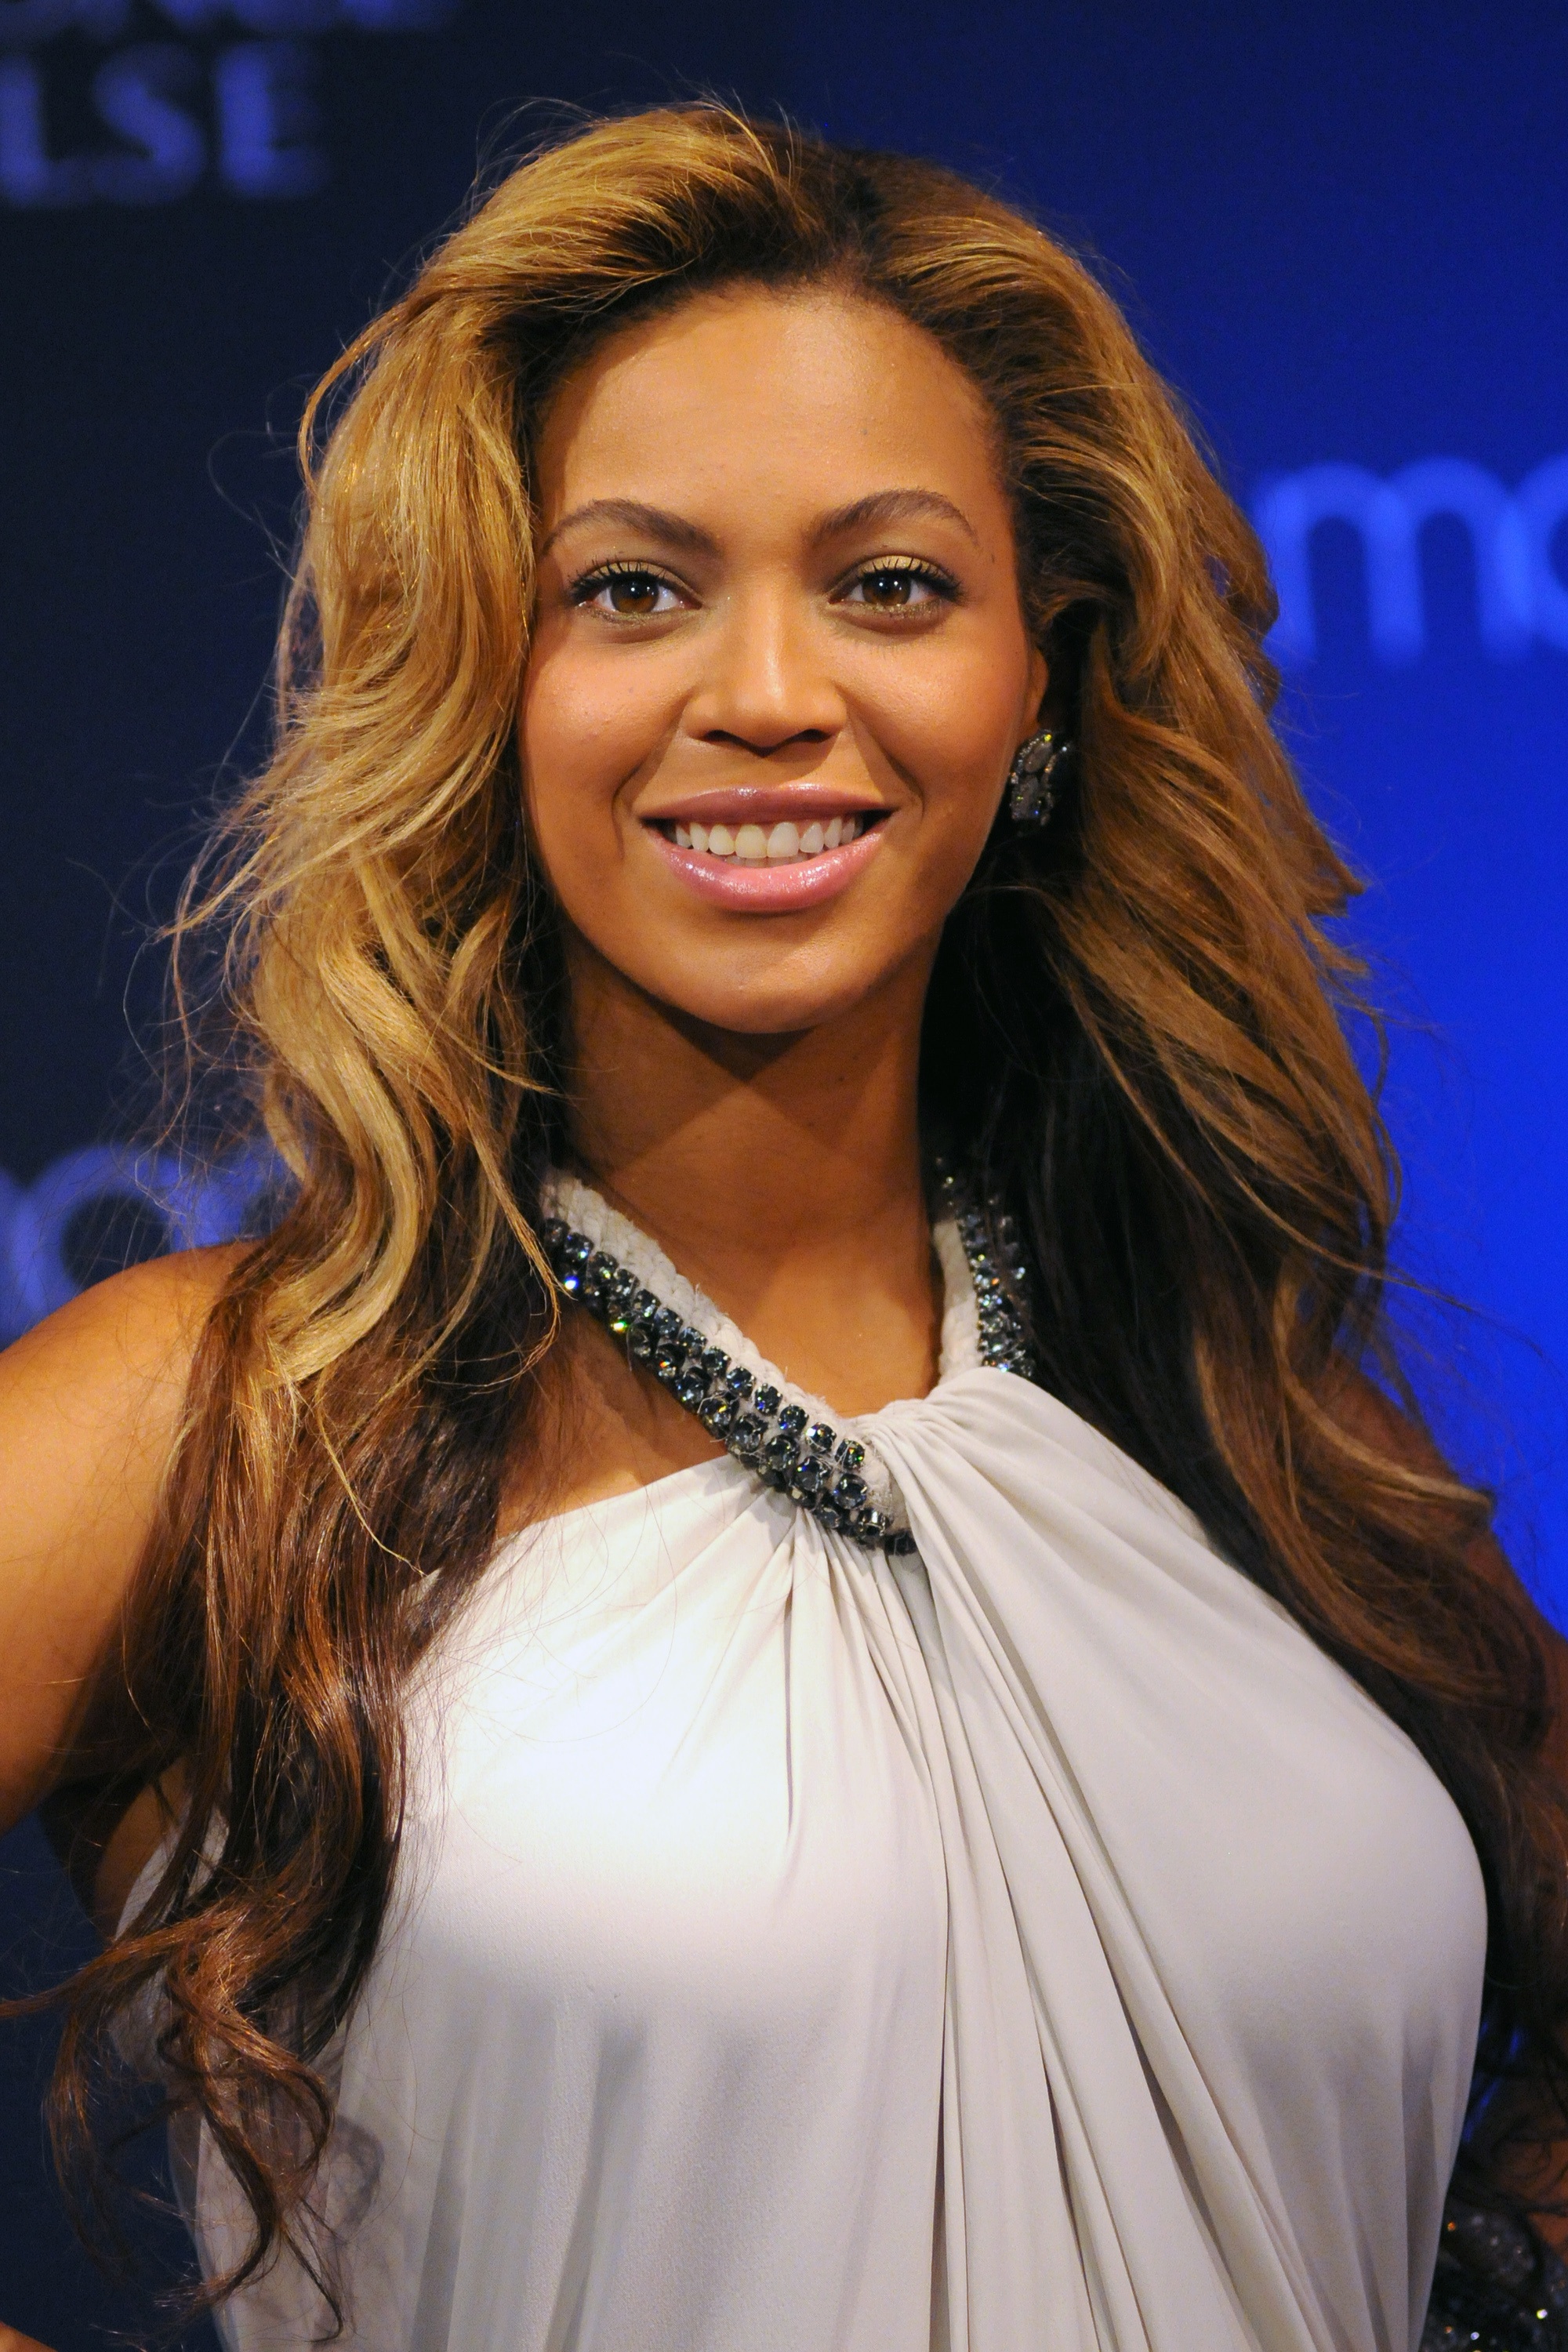 Beyonce Knowles photo 3709 of 6637 pics, wallpaper - photo #656344 - ThePlace2